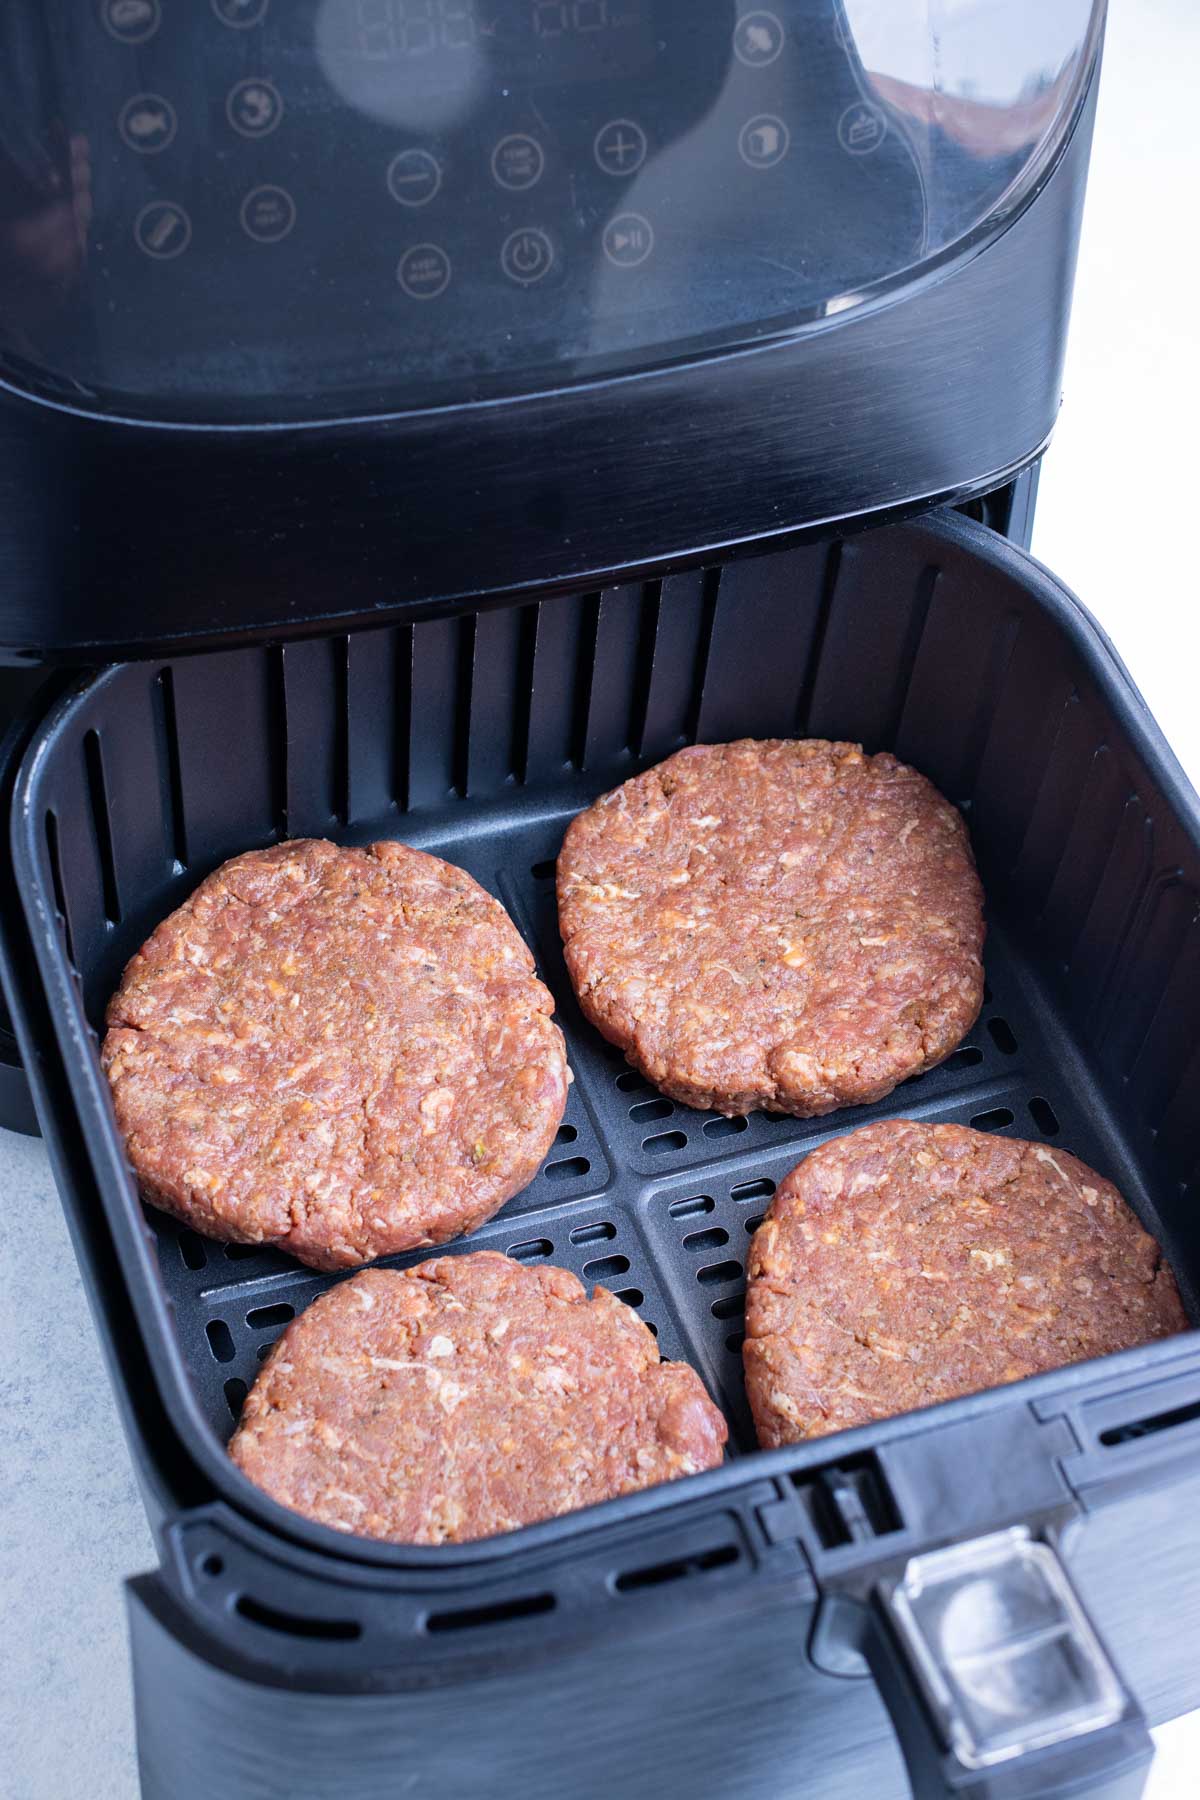 Four patties are added to the air fryer.